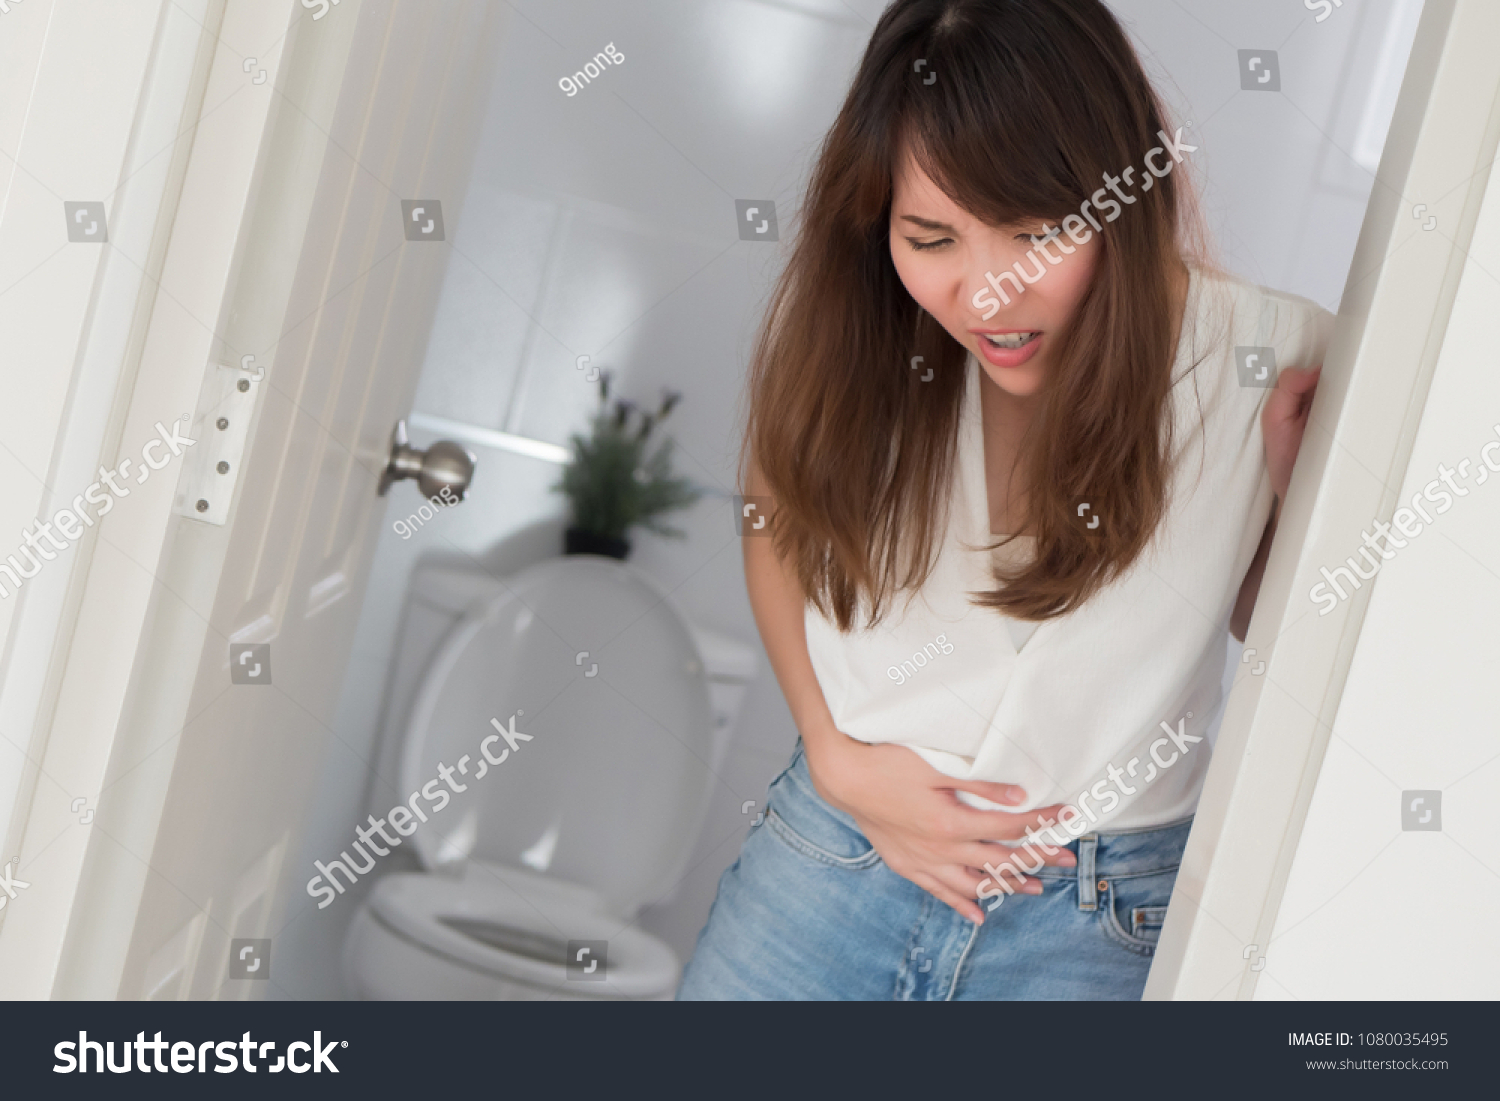 2,931 Asian girl on the toilet Images, Stock Photos & Vectors ...